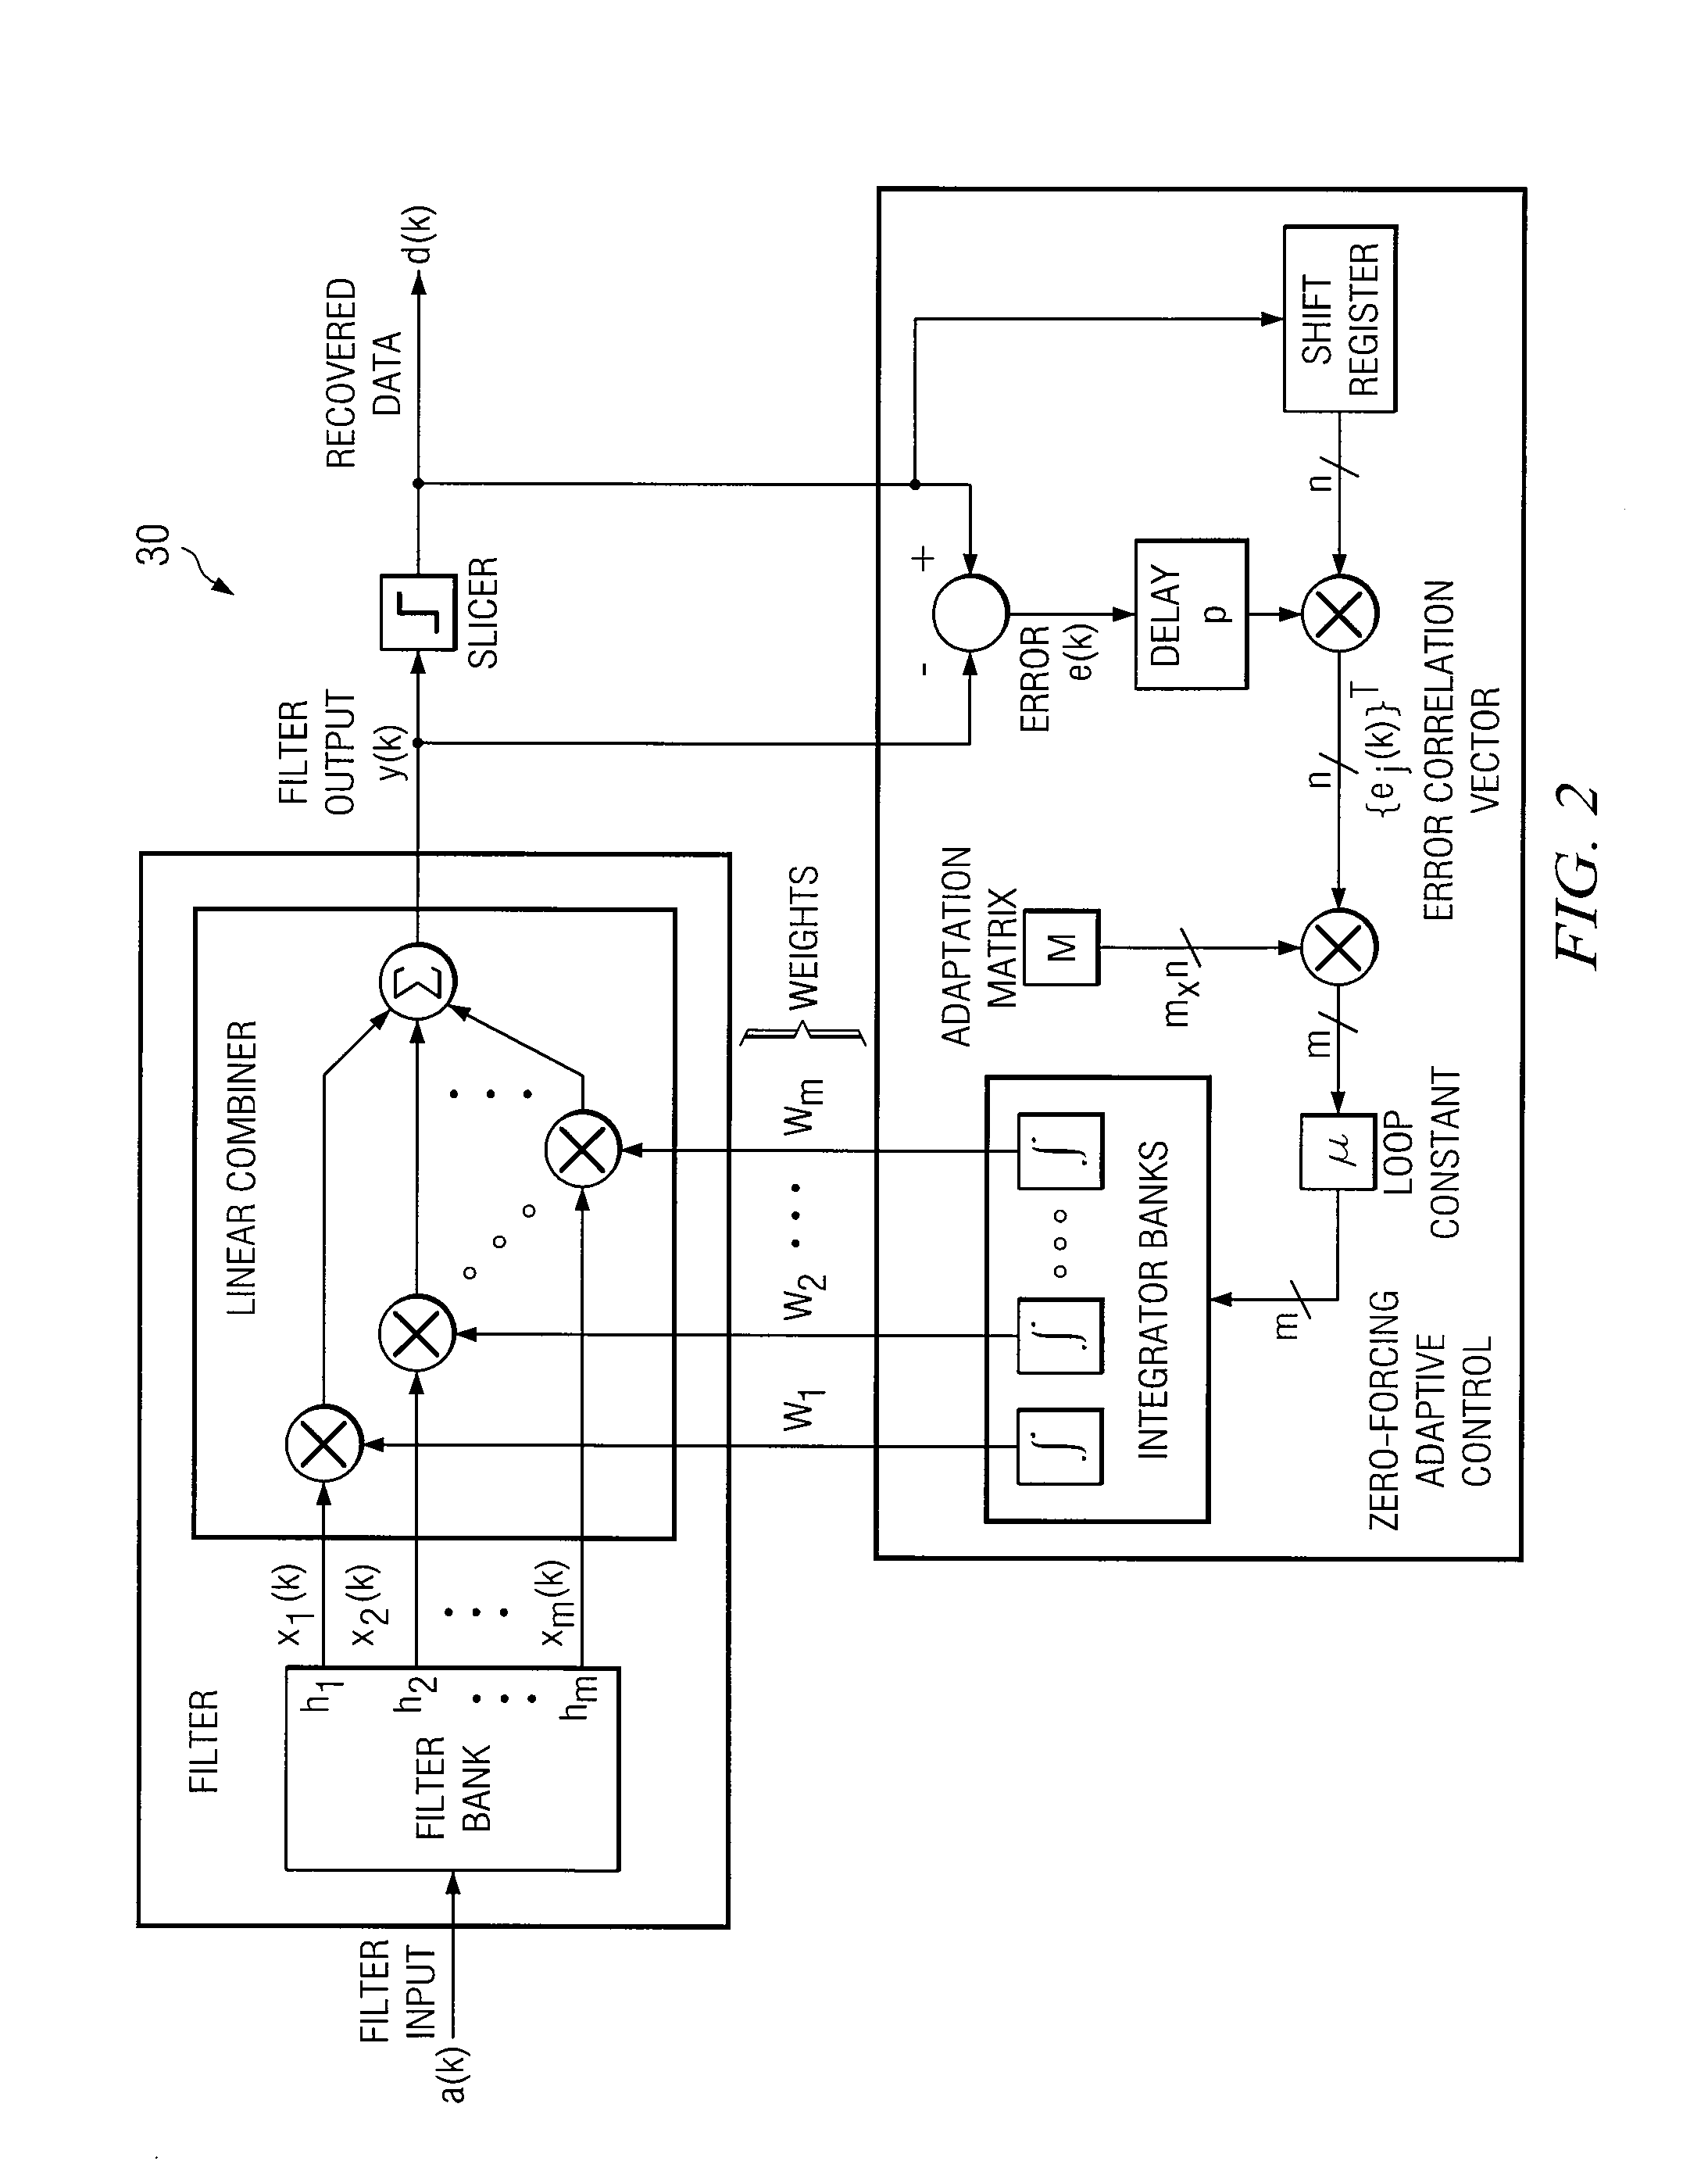 Method and System for Static Data-Pattern Compensated Adaptive Equalizer Control